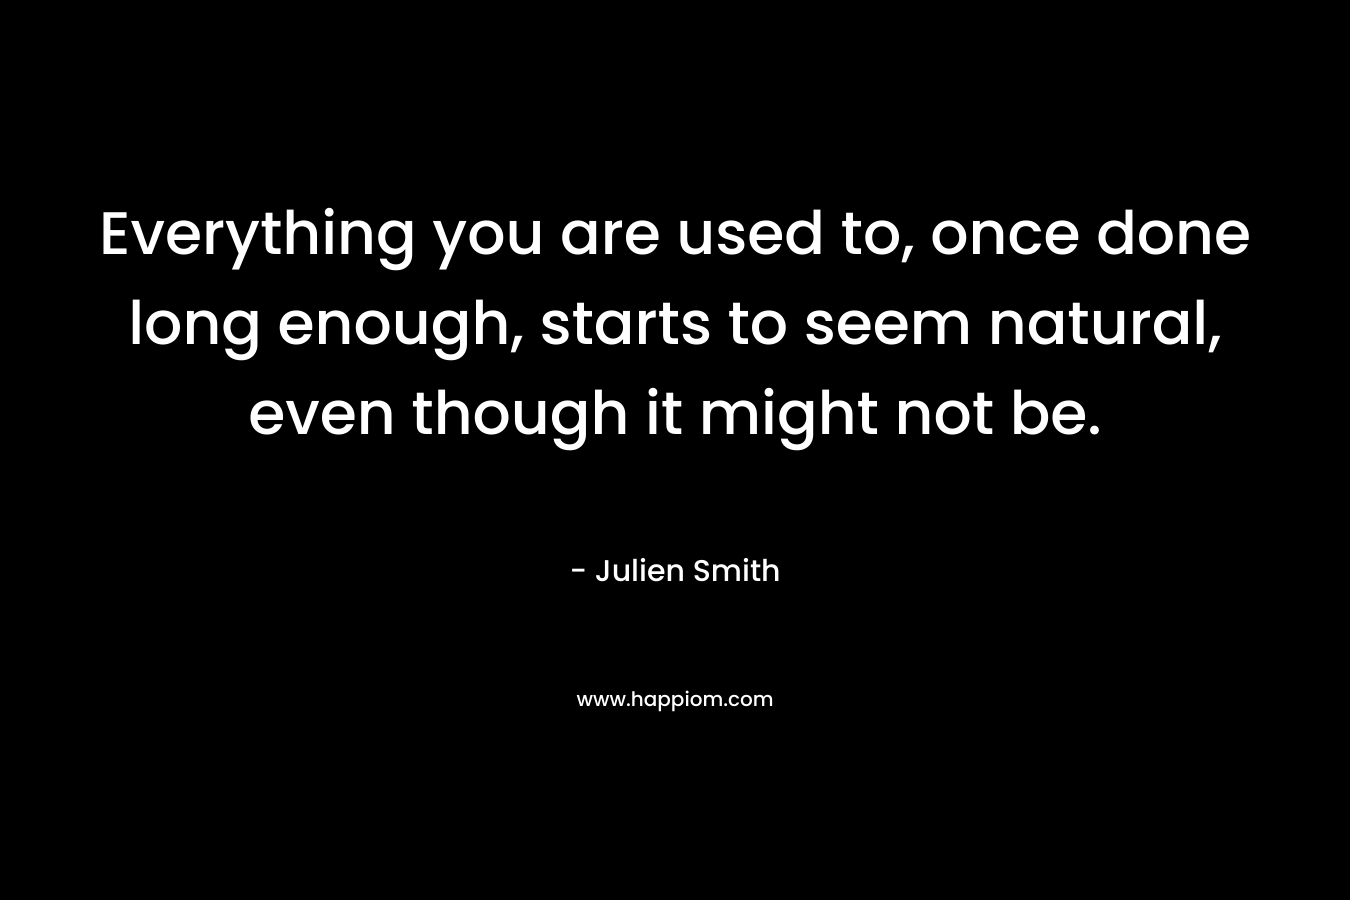 Everything you are used to, once done long enough, starts to seem natural, even though it might not be. – Julien Smith